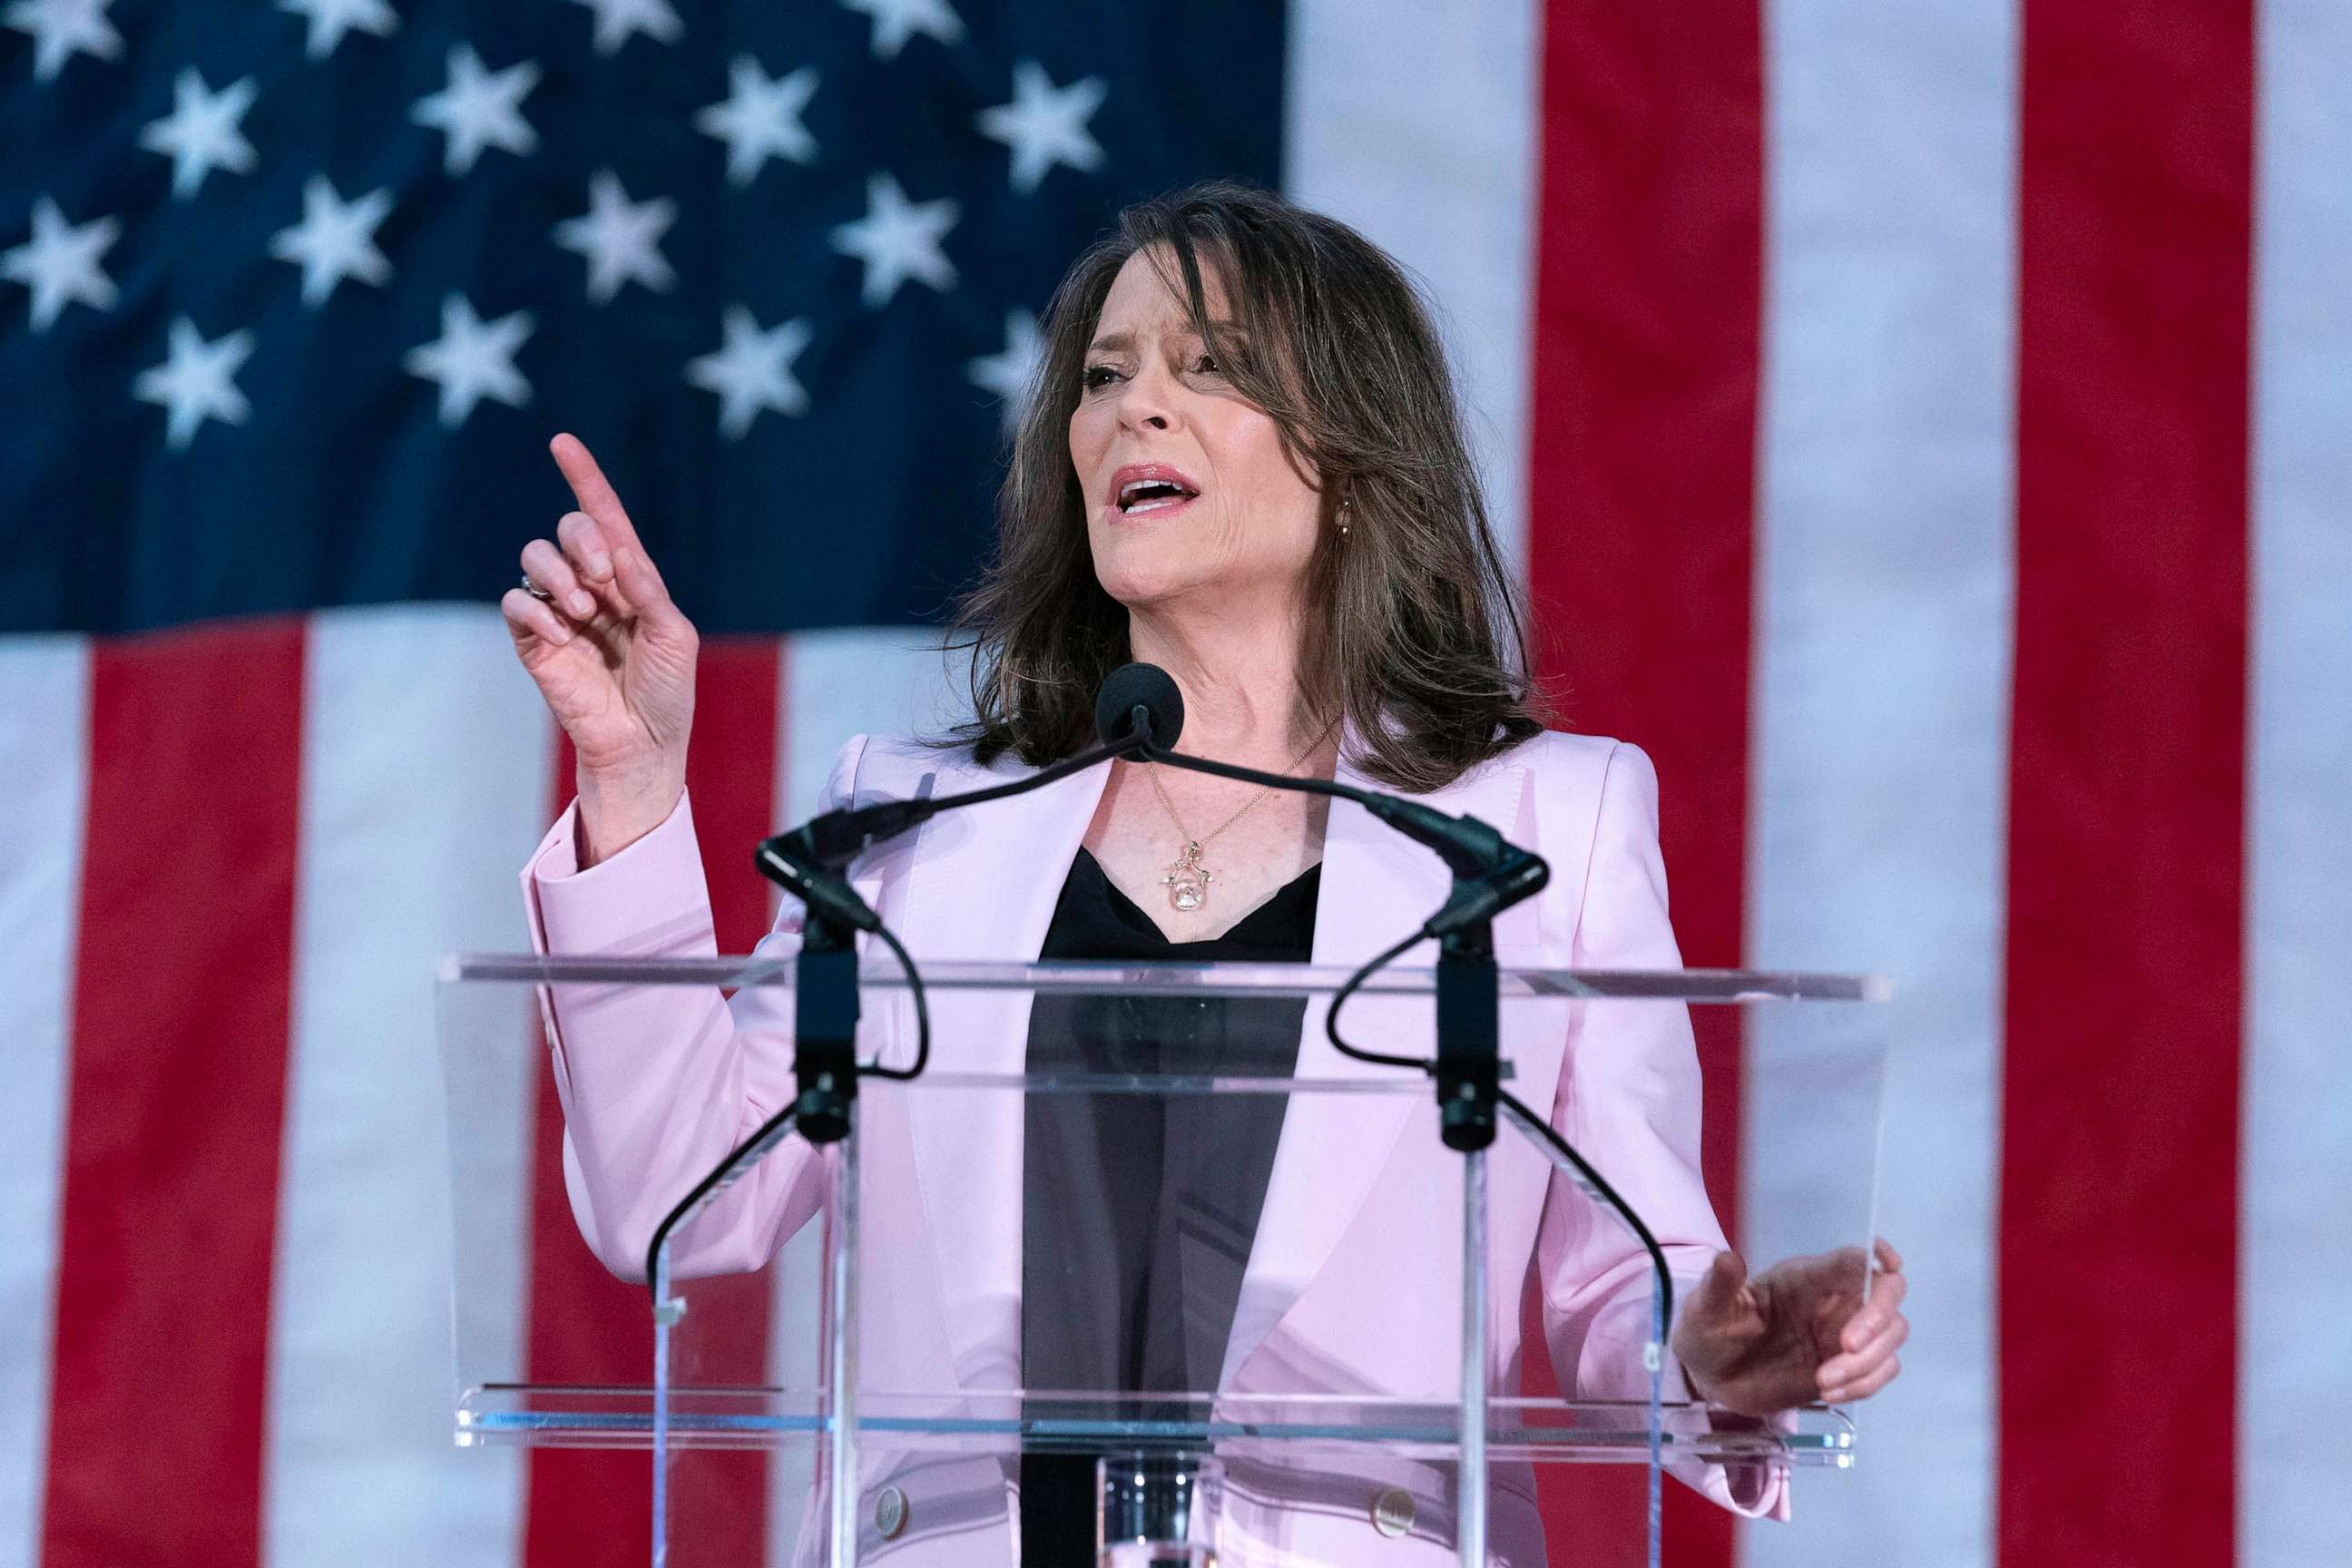 PHOTO: Self-help author Marianne Williamson speaks to the crowd as she launches her 2024 presidential campaign in Washington, D.C., on March 4, 2023.